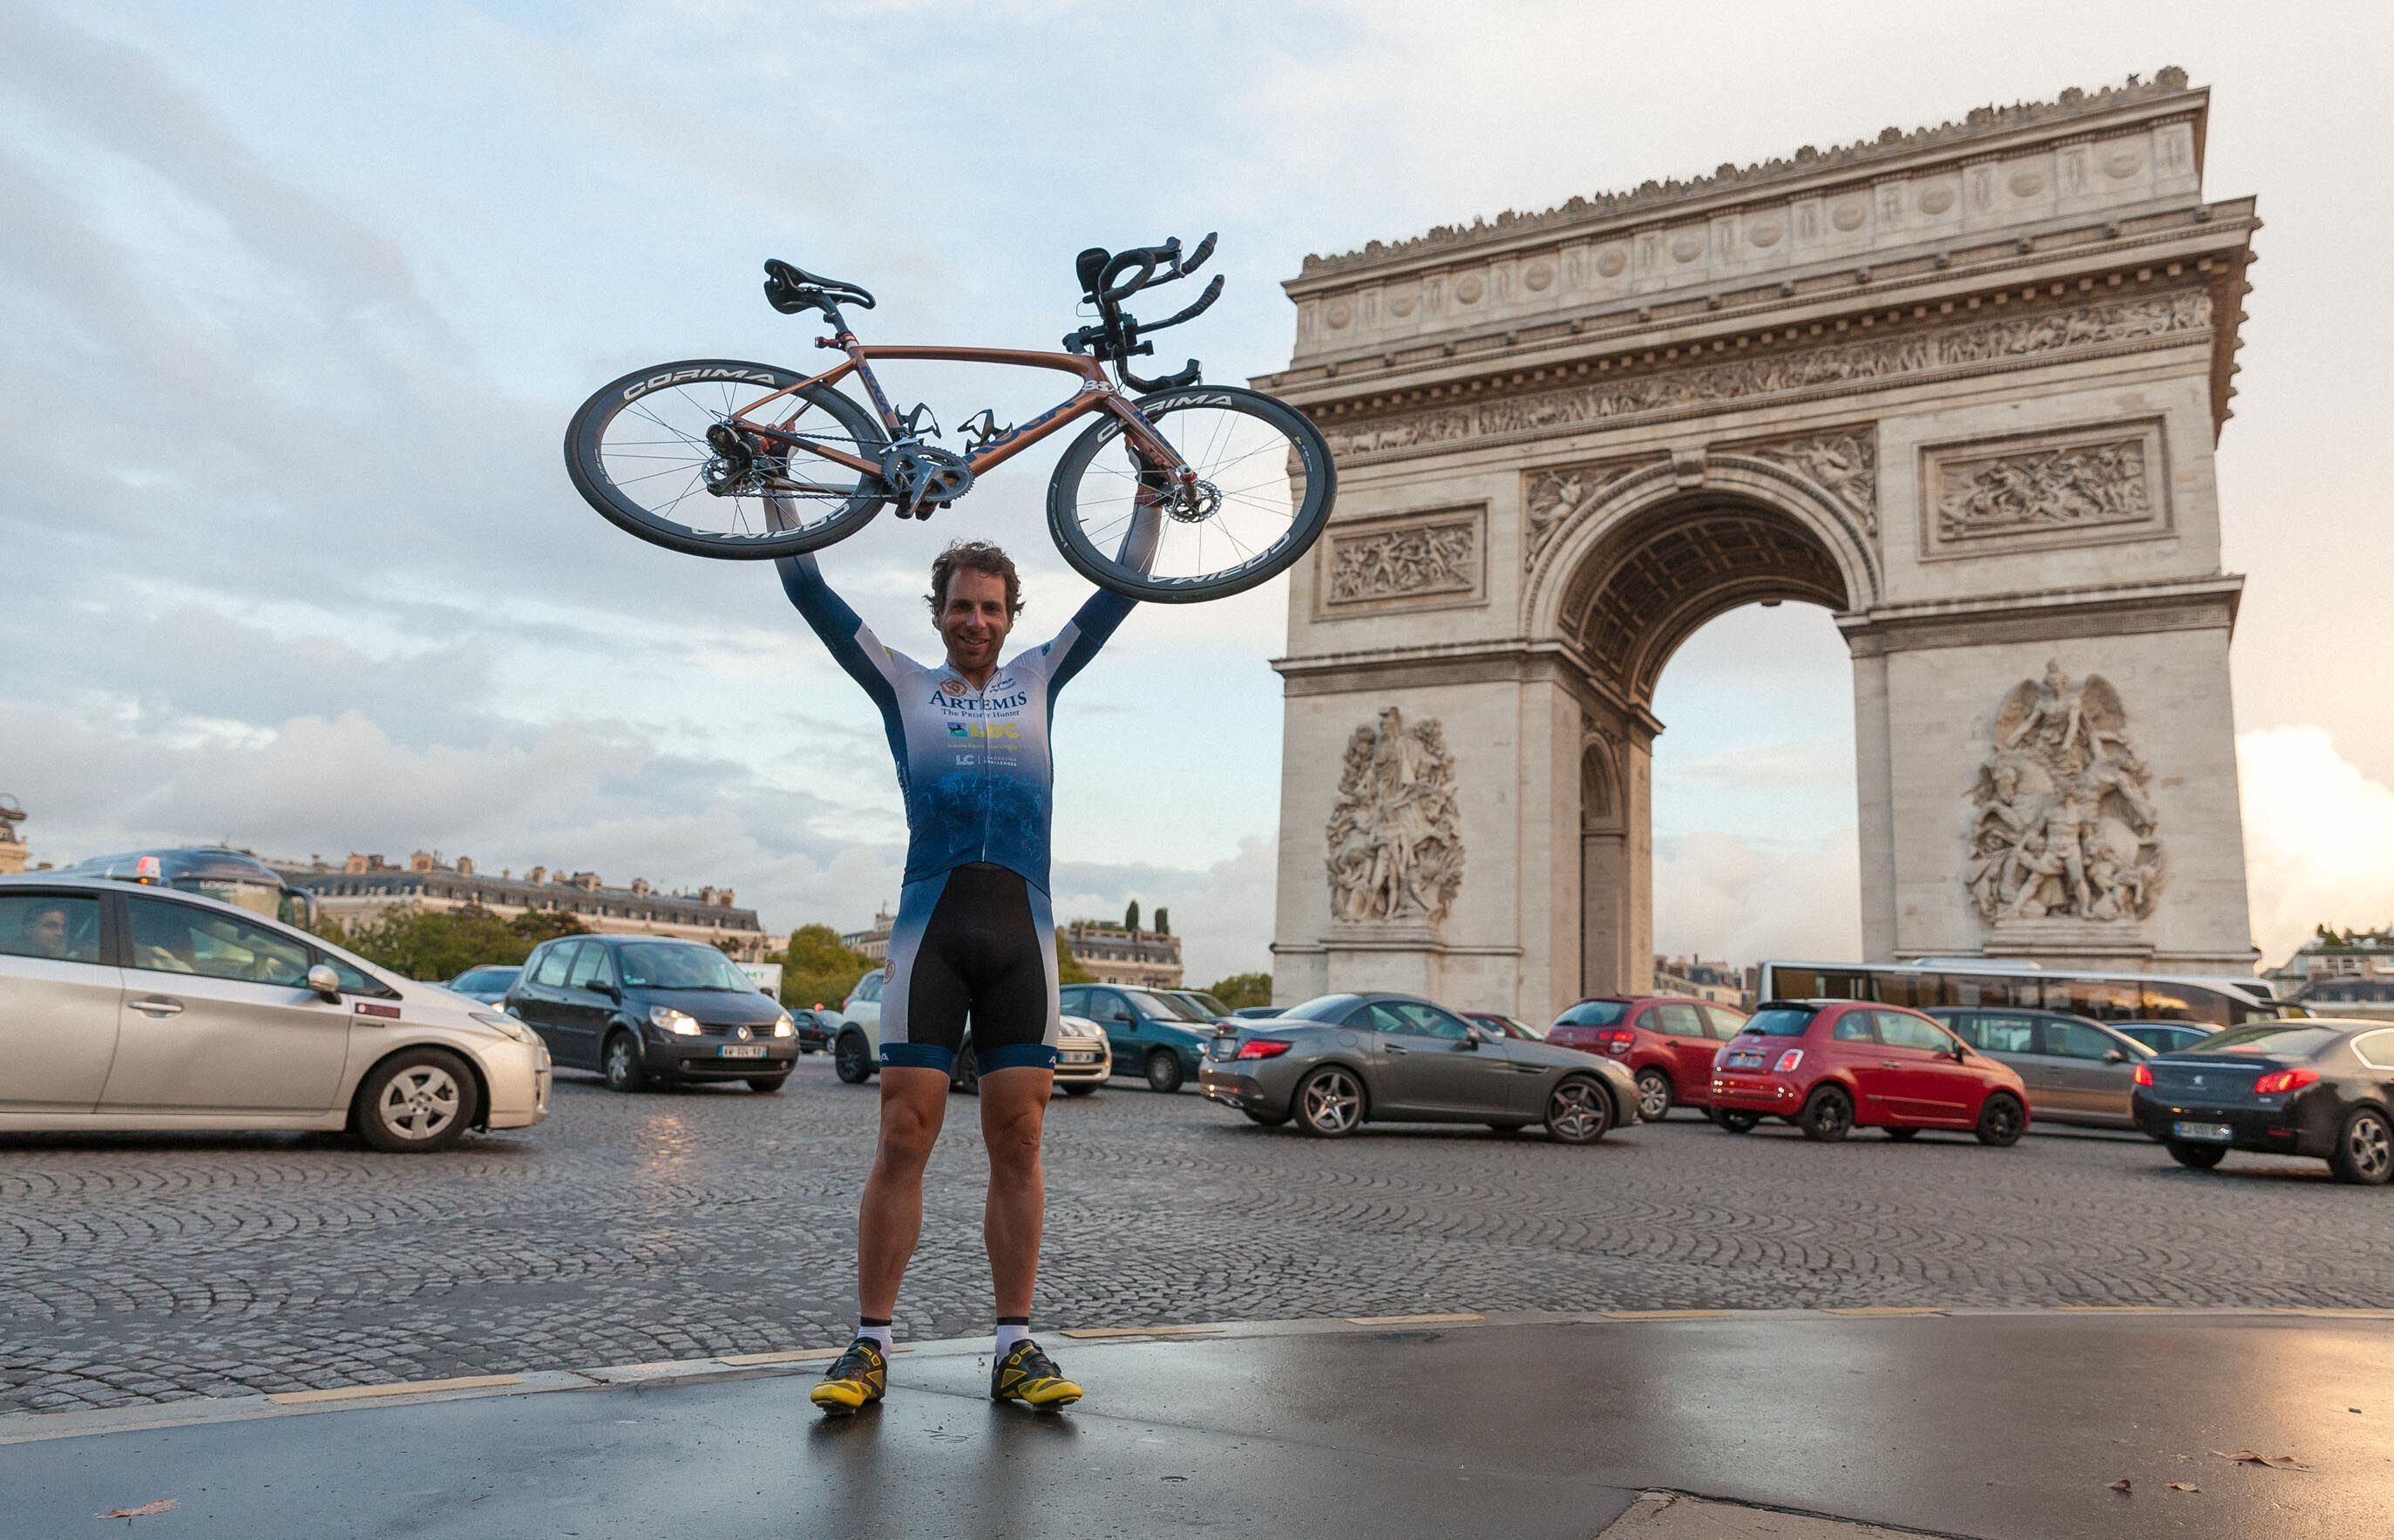 Mark Beaumont completed his record-breaking cycle around the world at the Arc De Triomphe in Paris in 2017